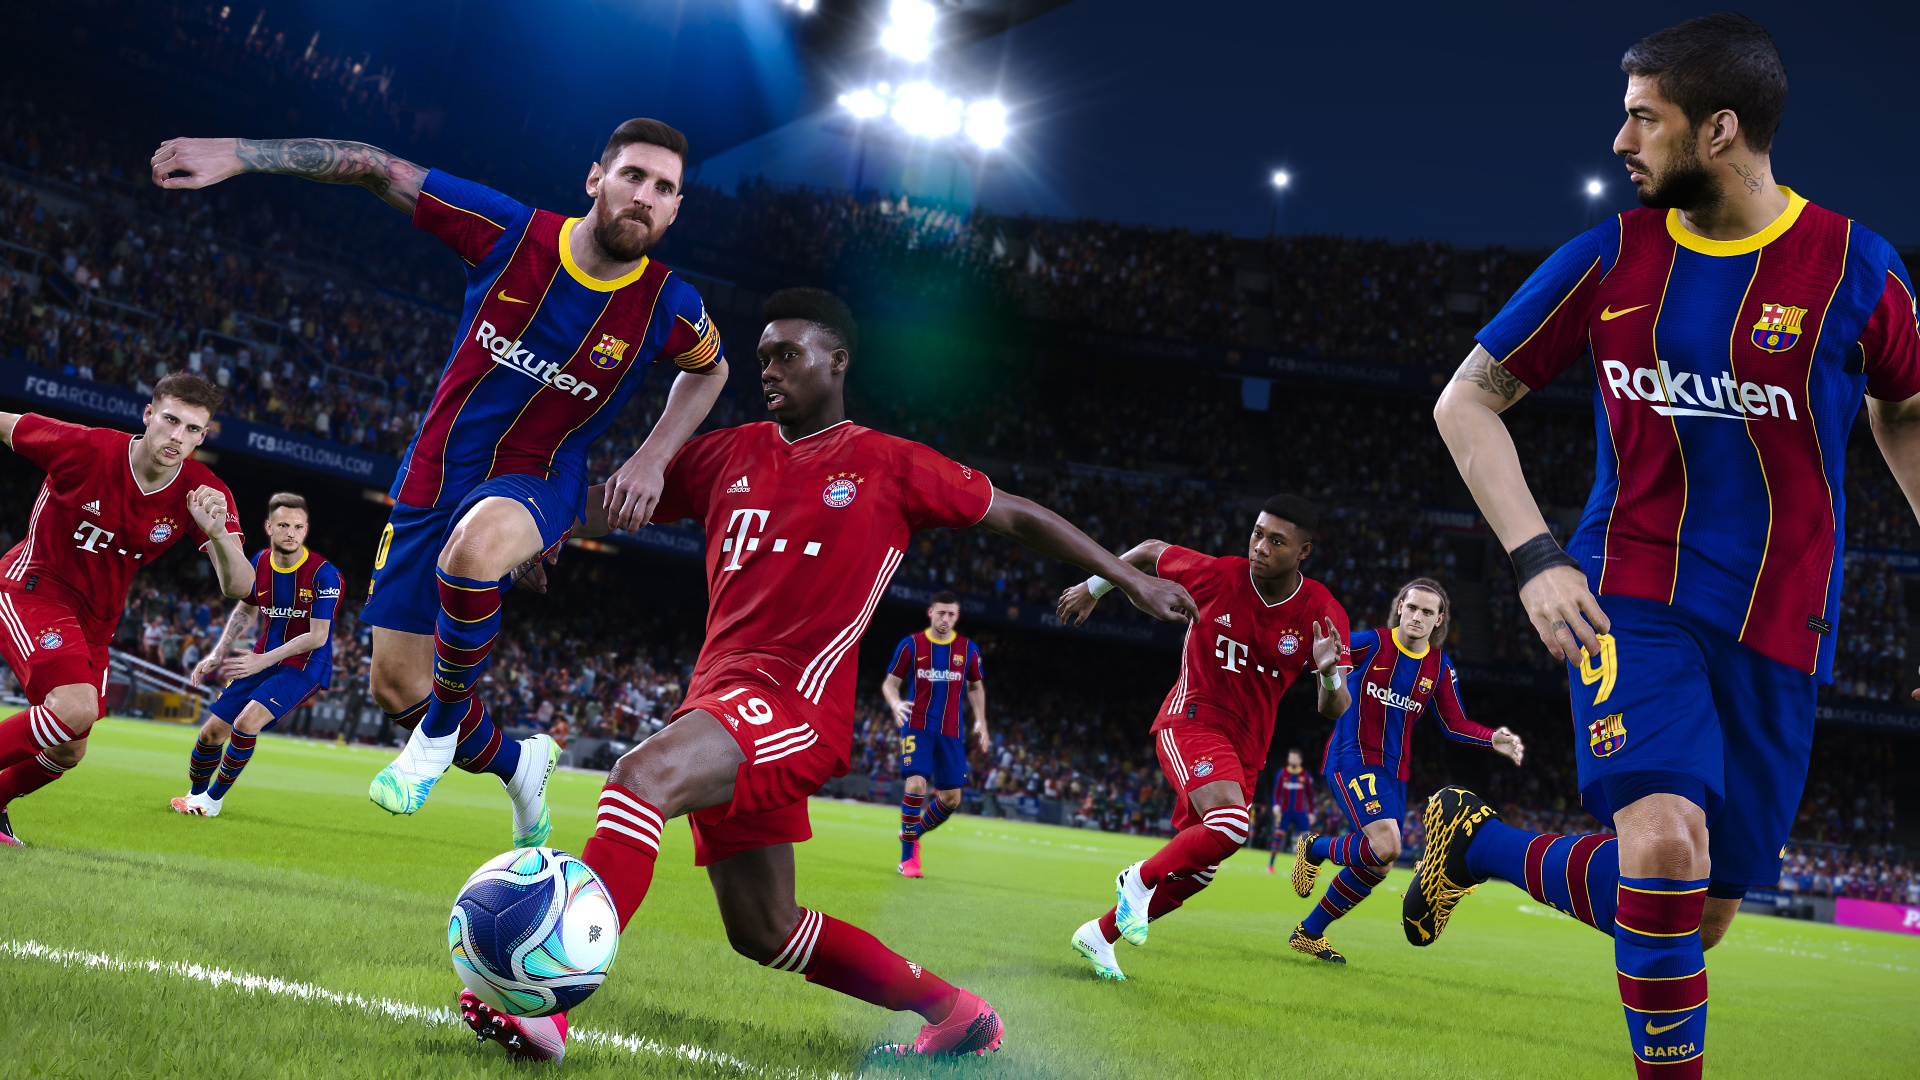 efootball pes 2022 mobile download